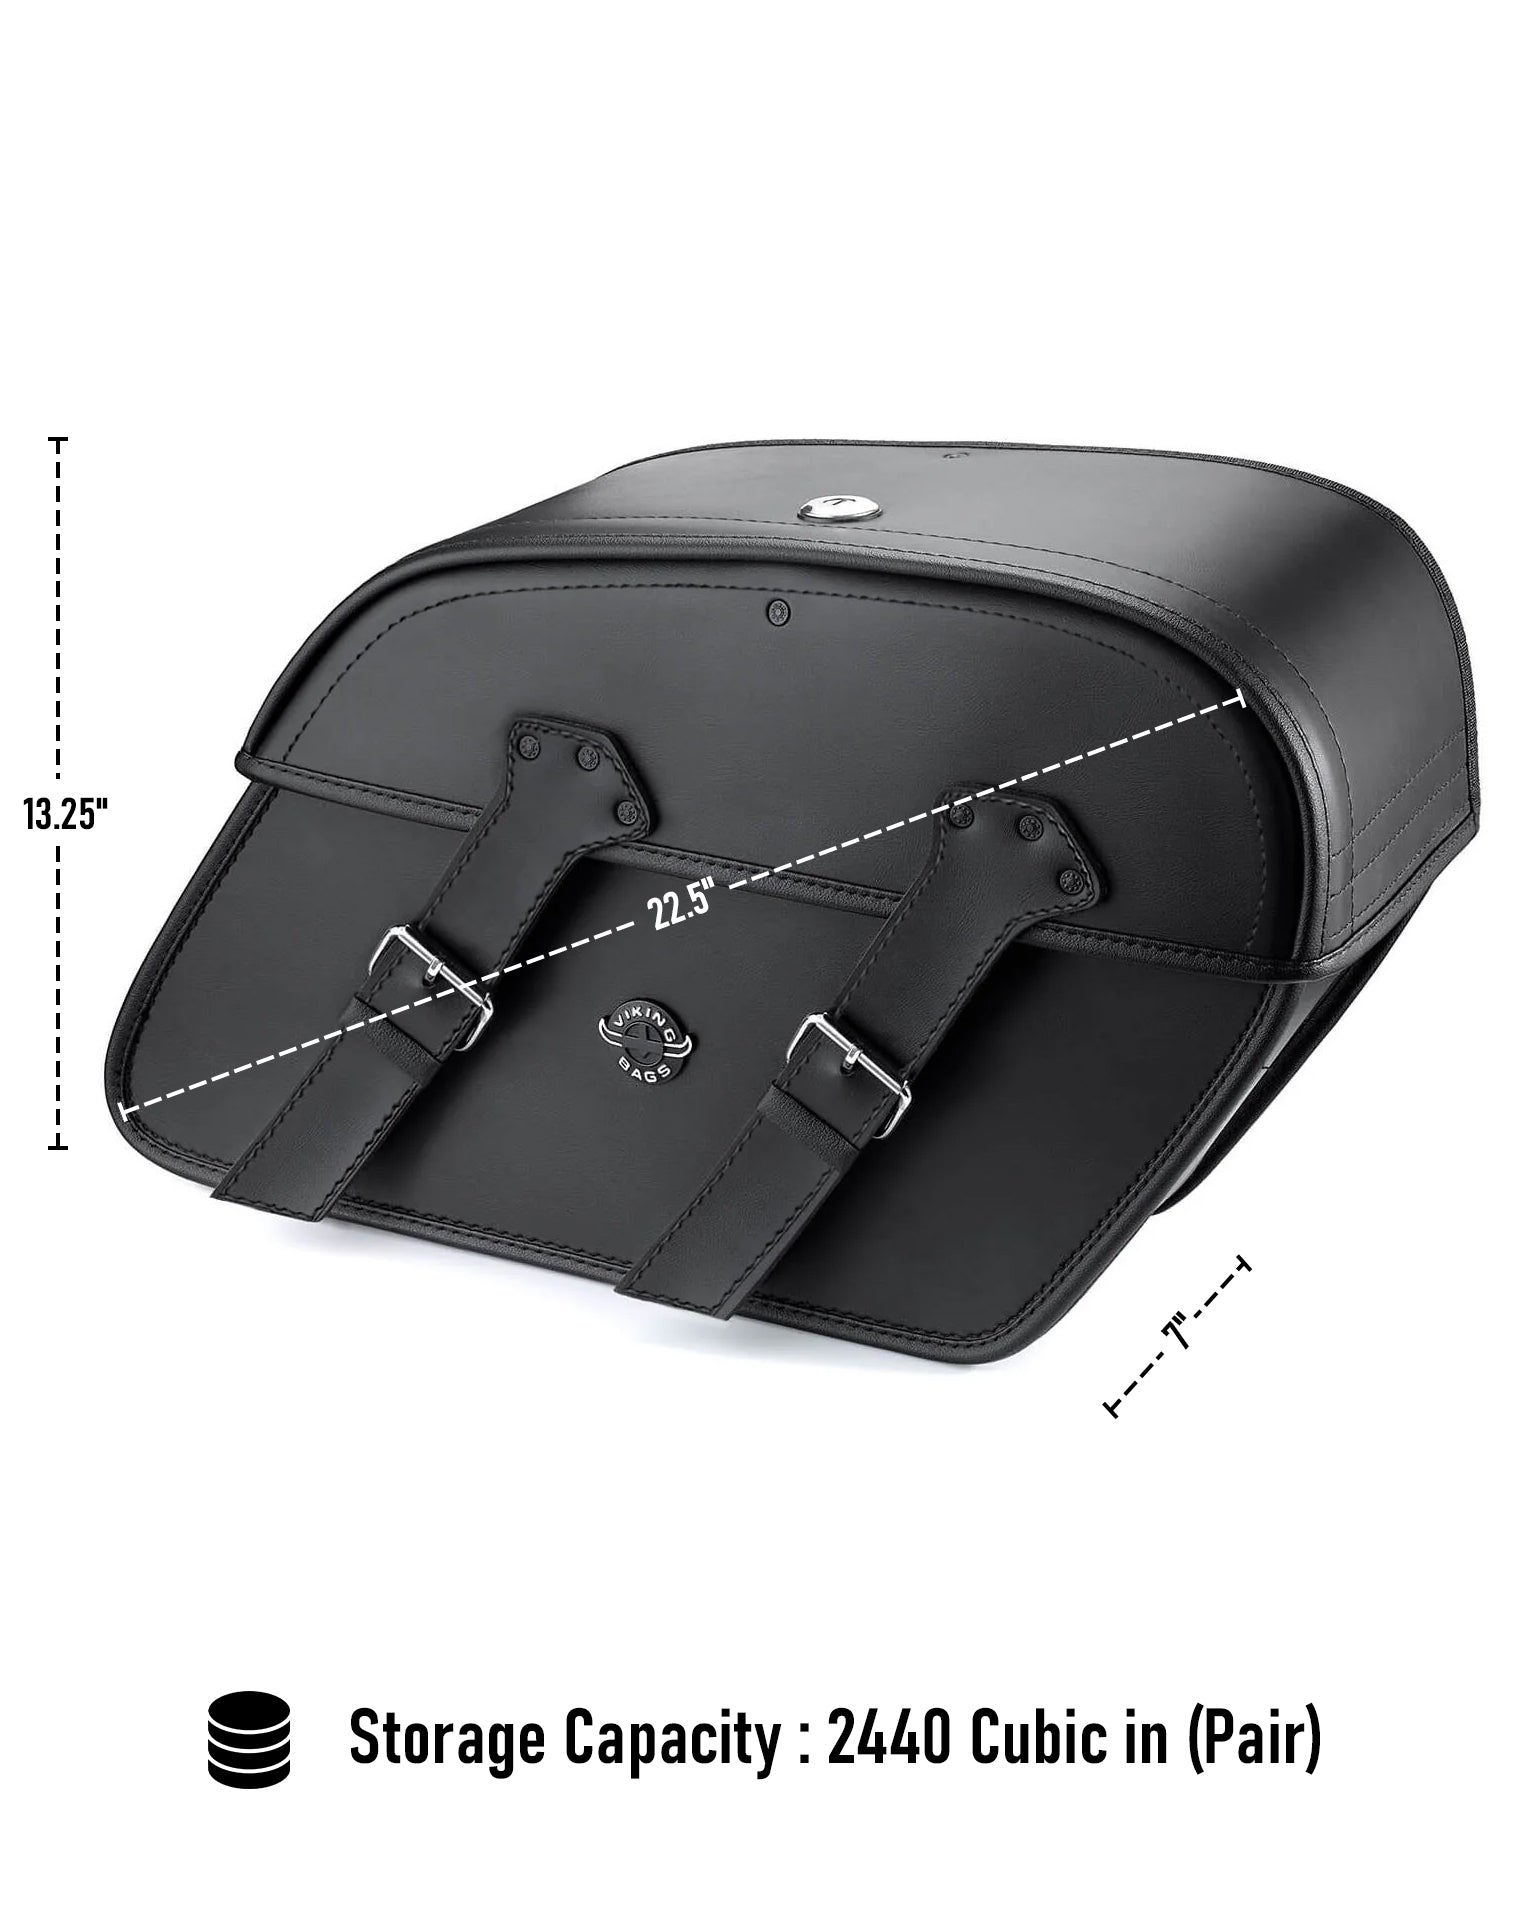 Viking Raven Extra Large Kawasaki Eliminator 125 Bn125 Leather Motorcycle Saddlebags Can Store Your Ridings Gears